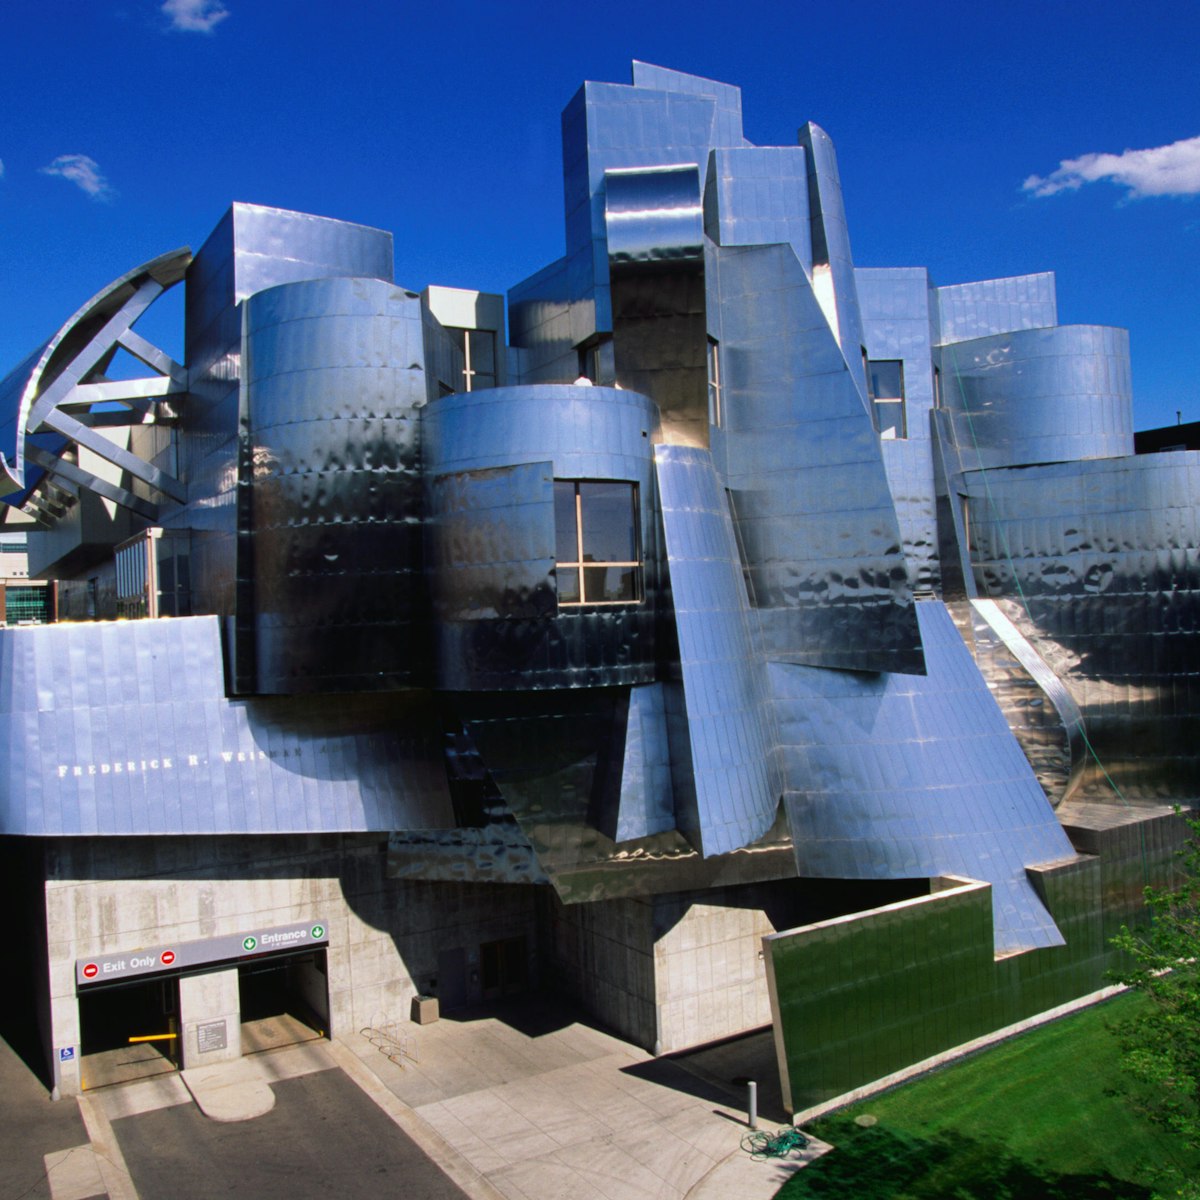 The Frederick Weisman Art Museum, the stainless steel structure by architect Frank Gehry, on the University of Minnesota campus - Minneapolis-St Paul, Minnesota